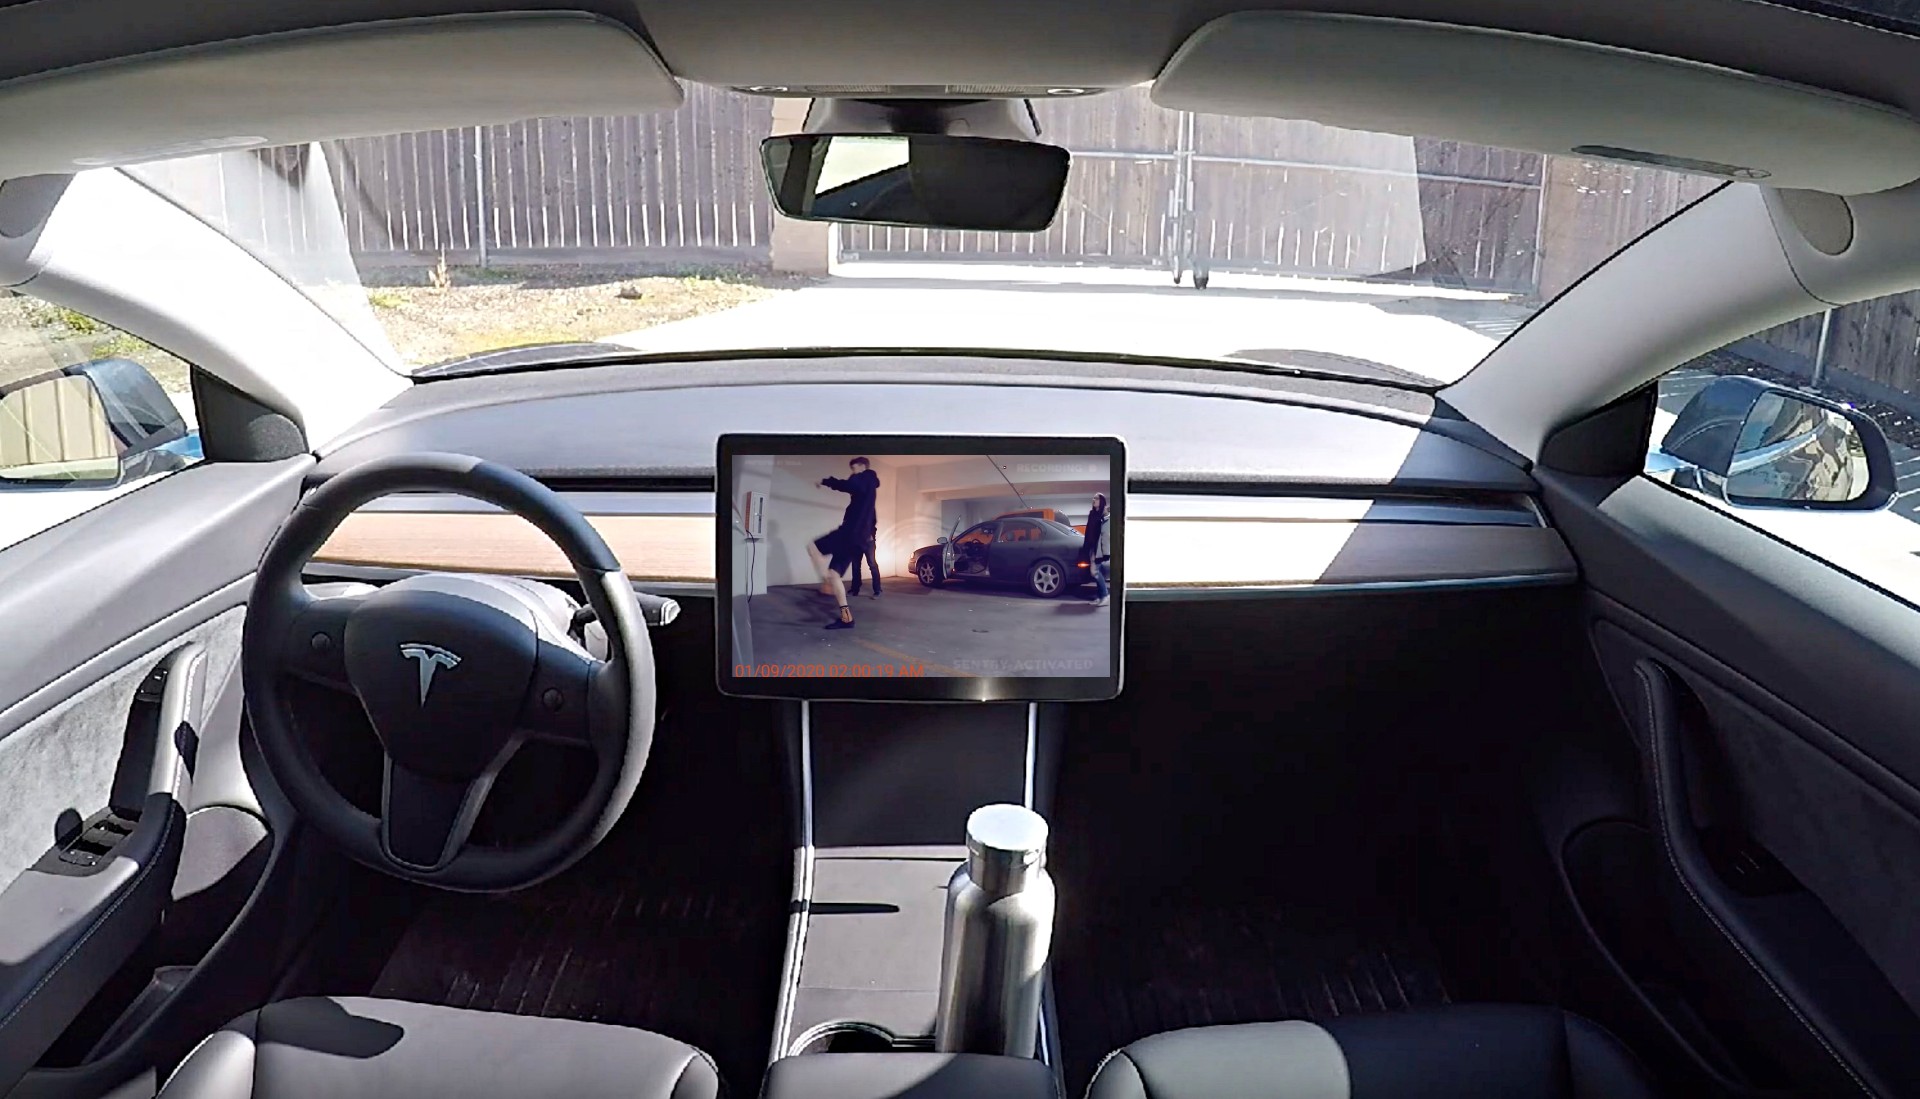 Tesla adds in-car Dashcam and Sentry Mode viewer for easier video playback access